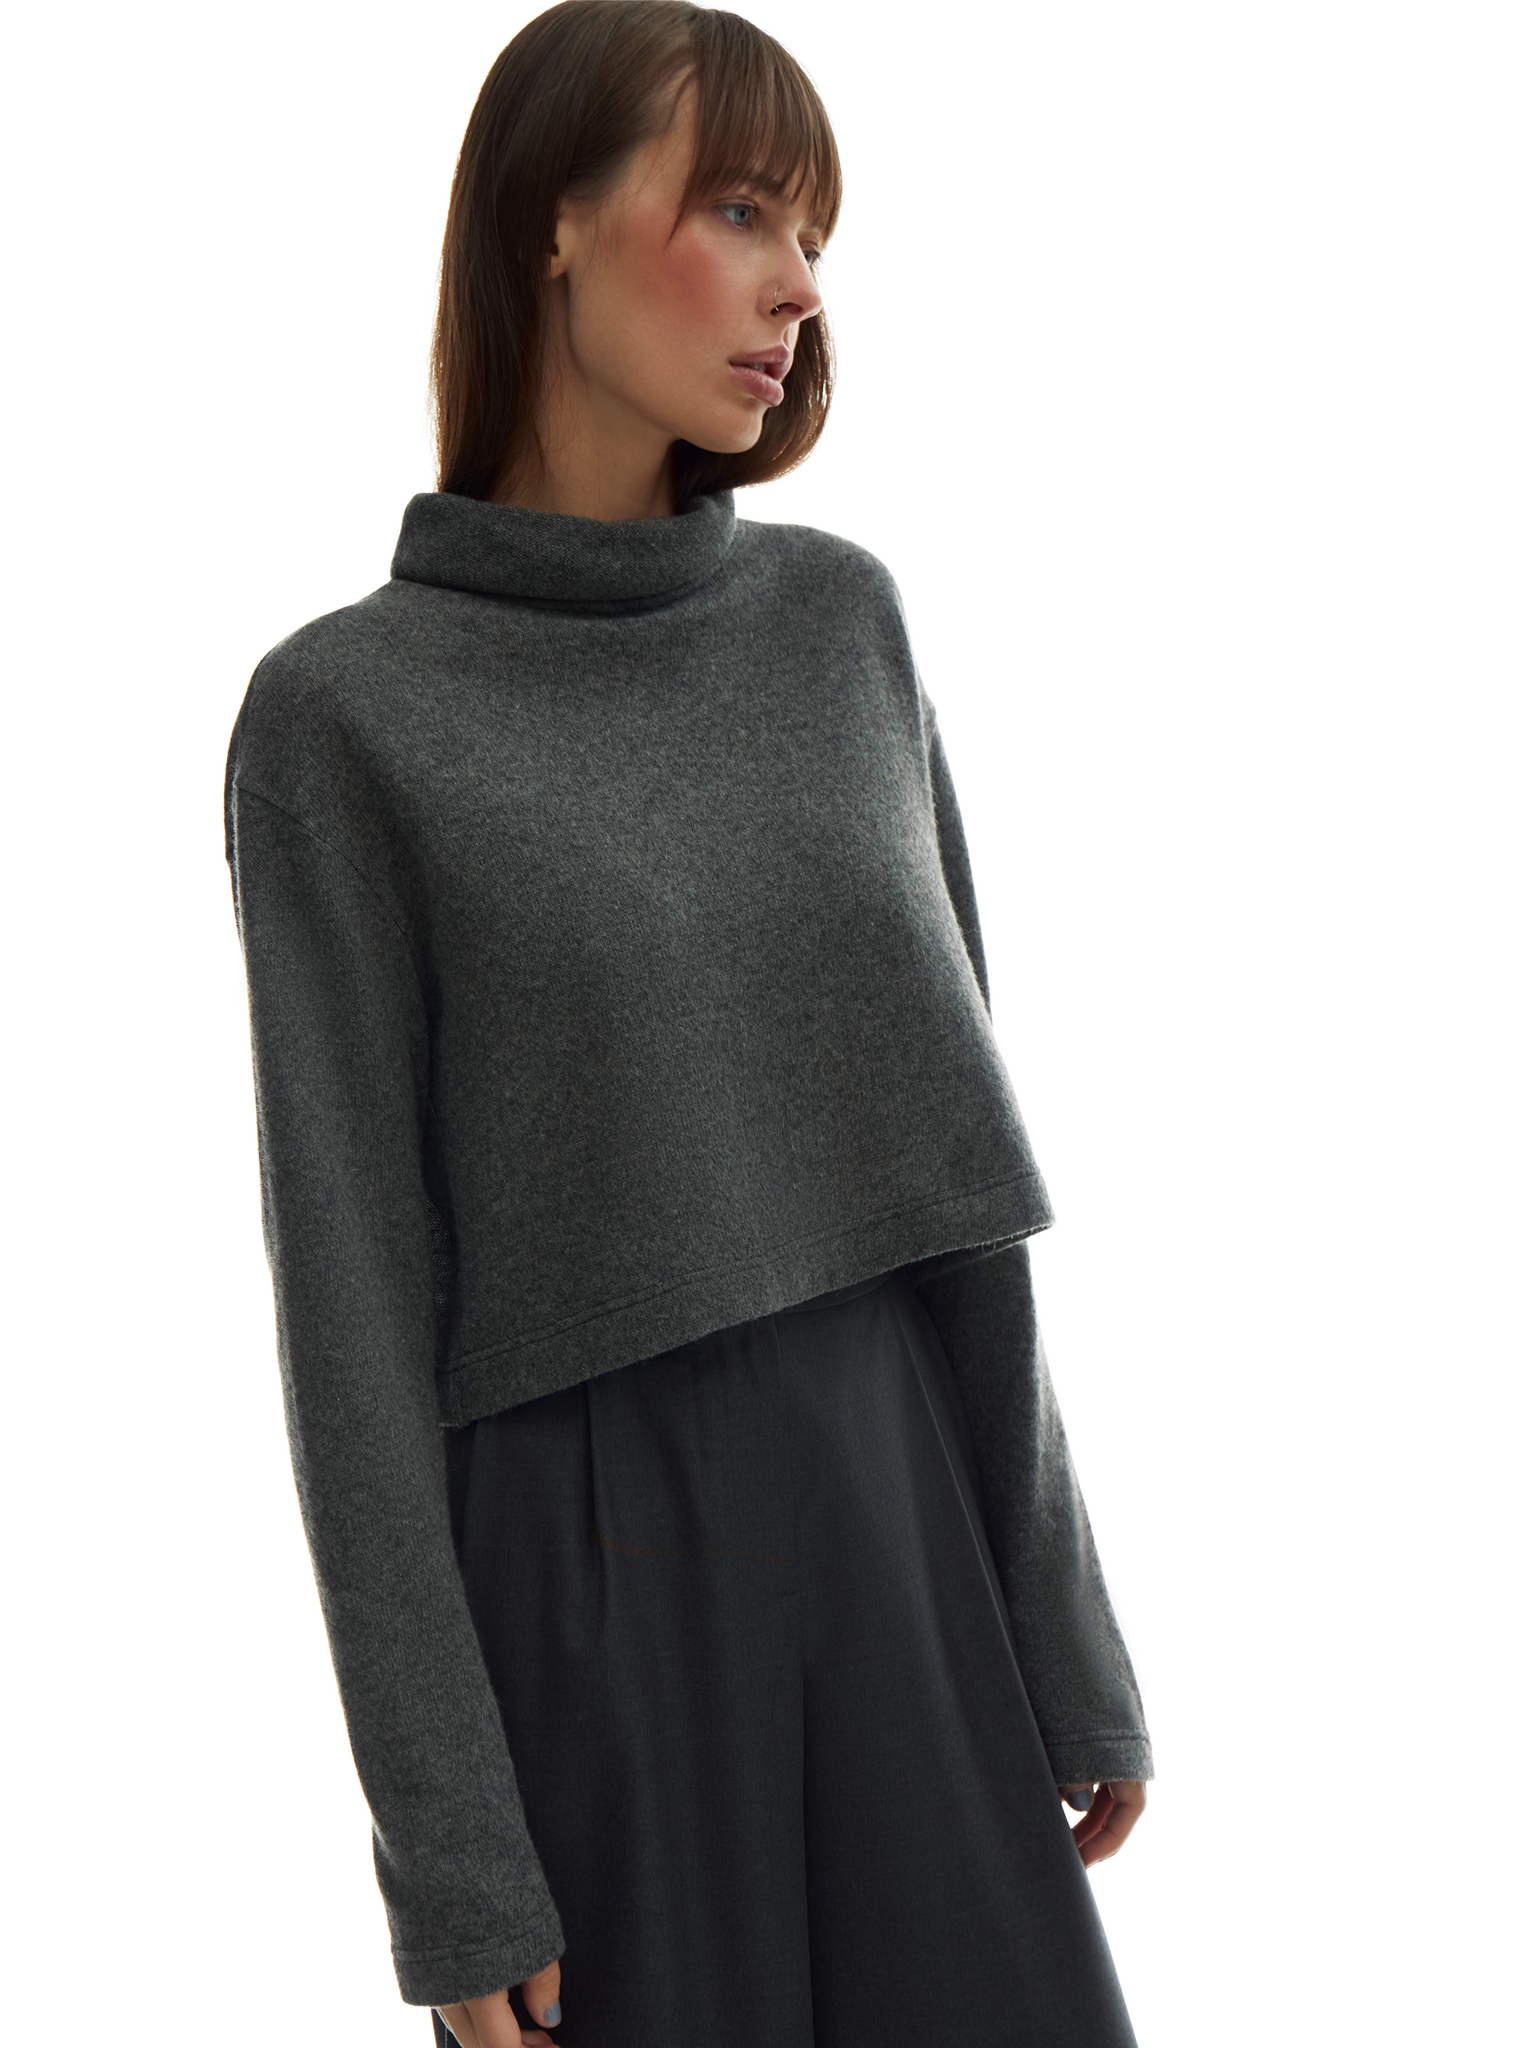 orla knit crop top in charcoal